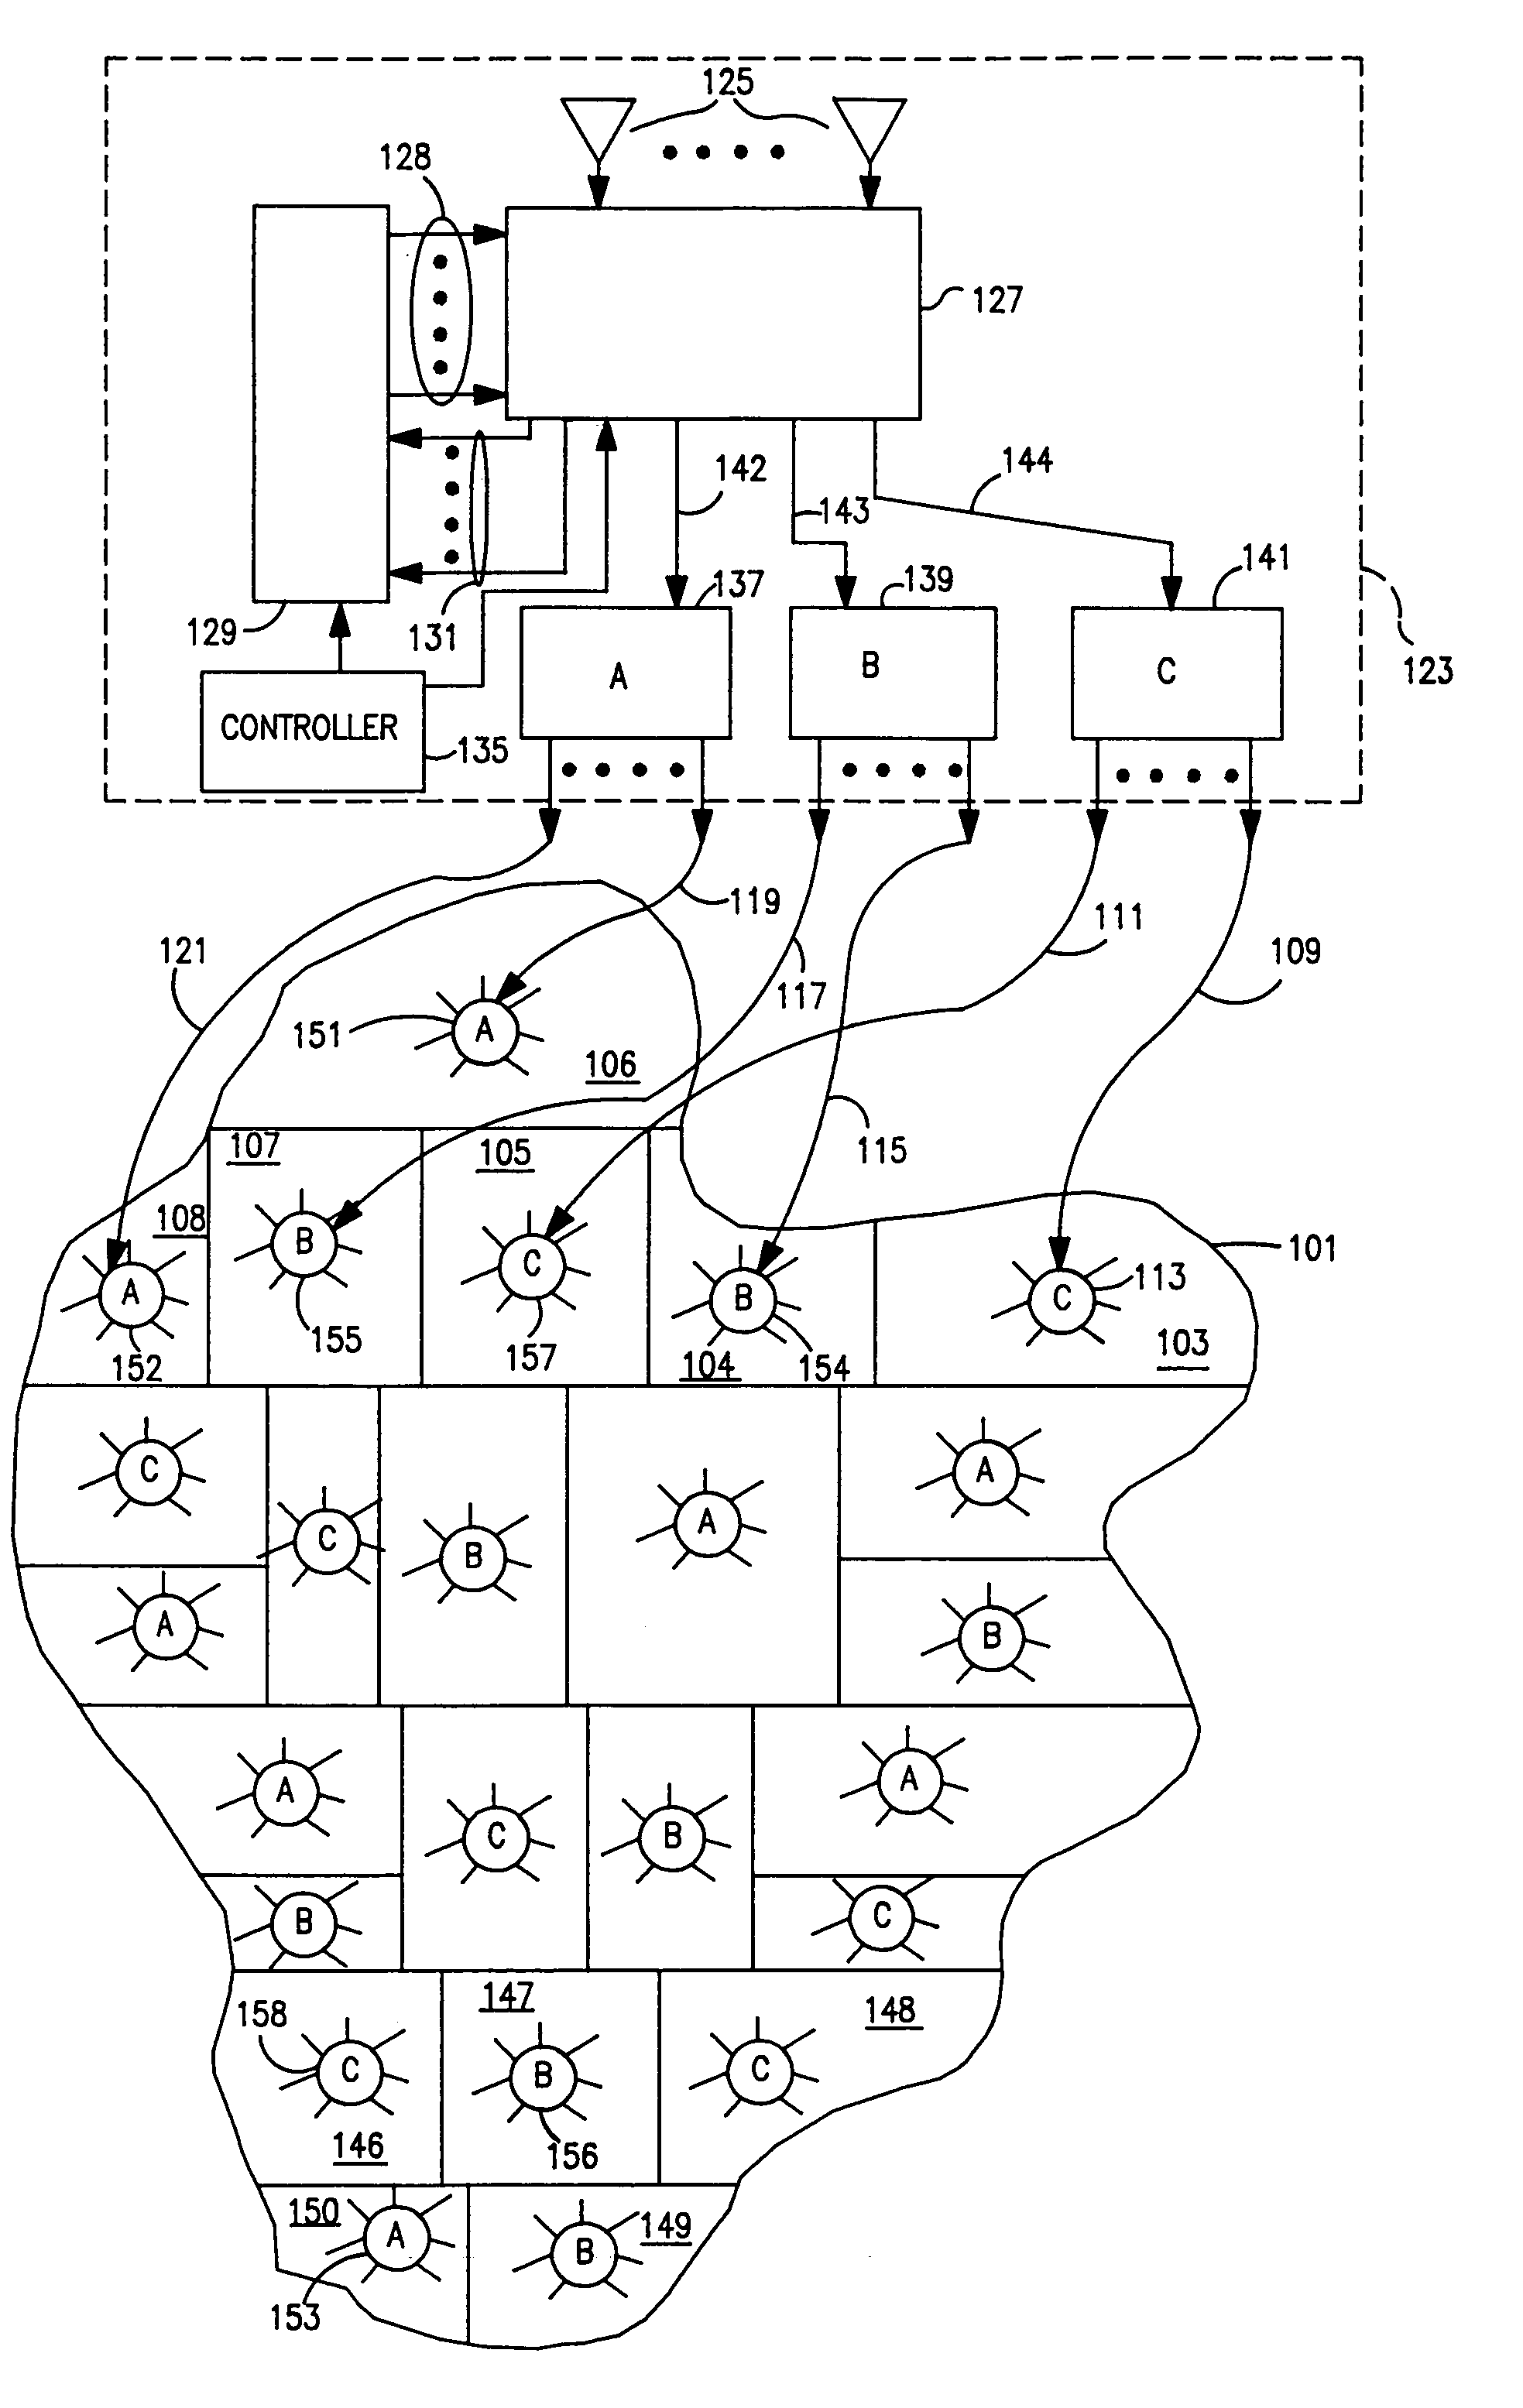 Television distribution system for signal substitution